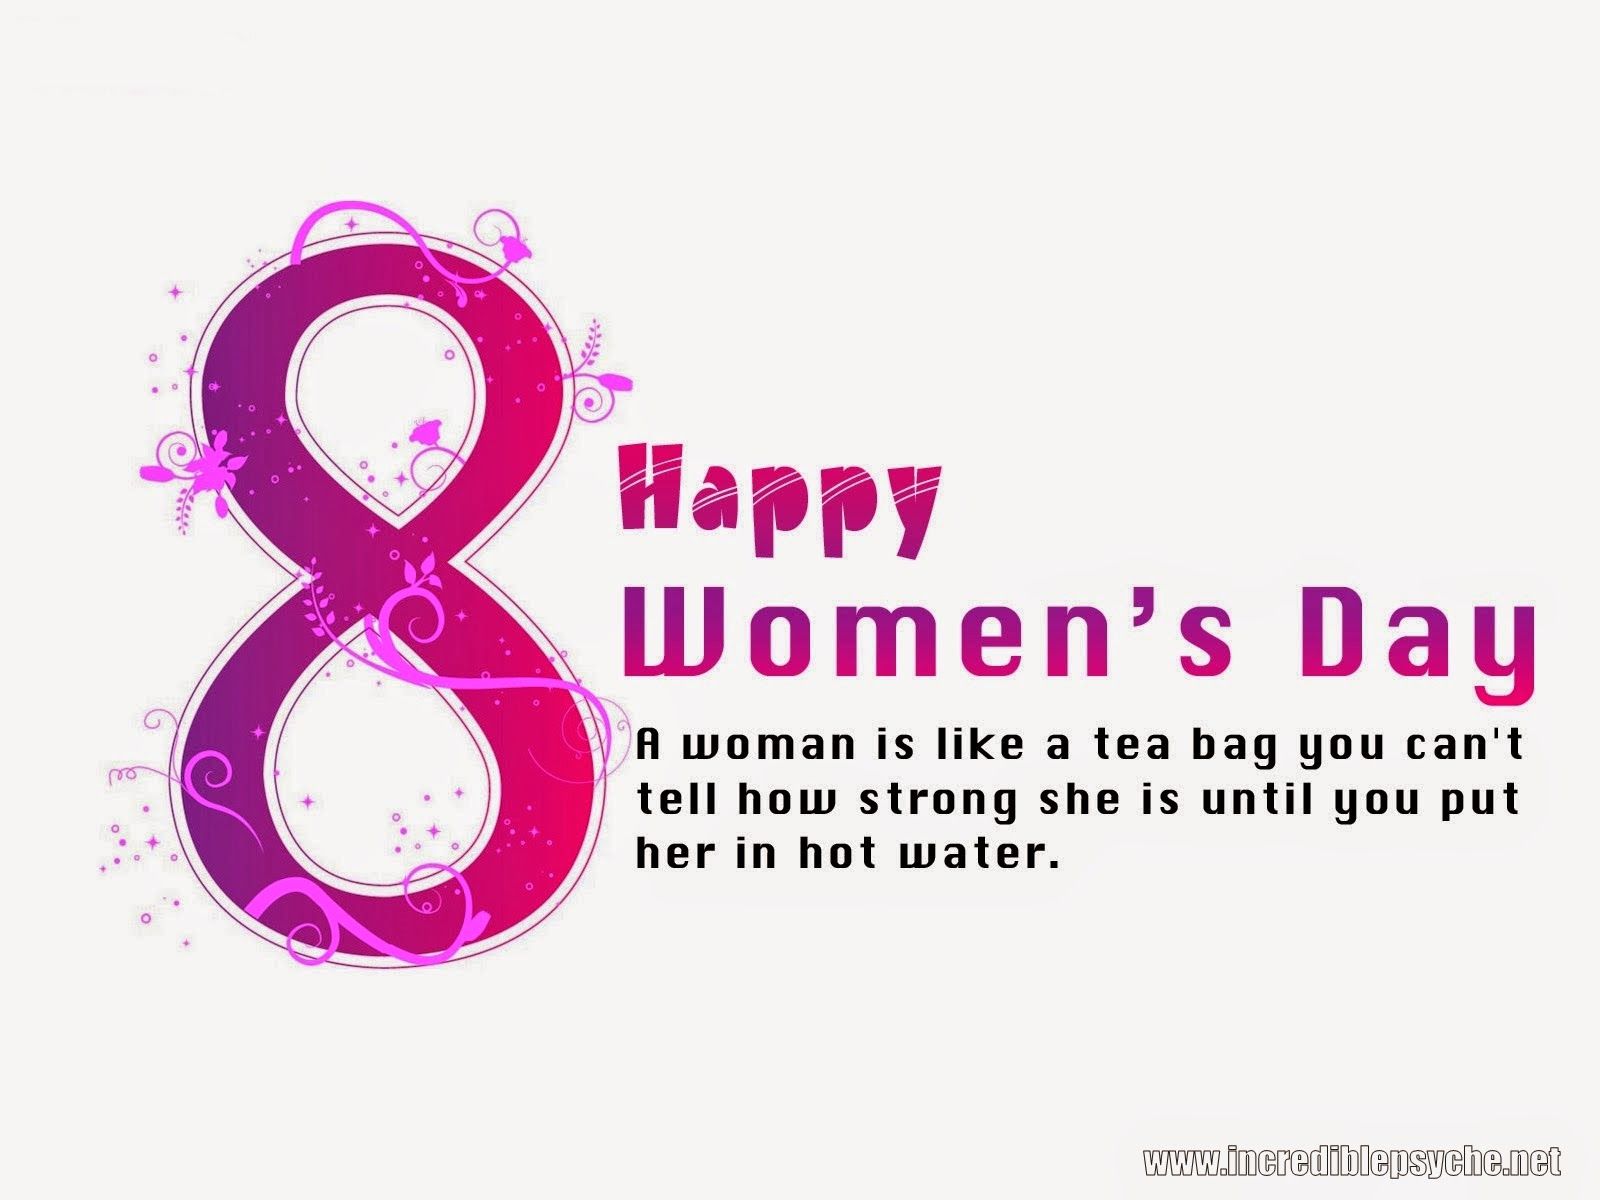 Happy International Women's Day Wishes, Messages, Greetings and HD Wallpaper